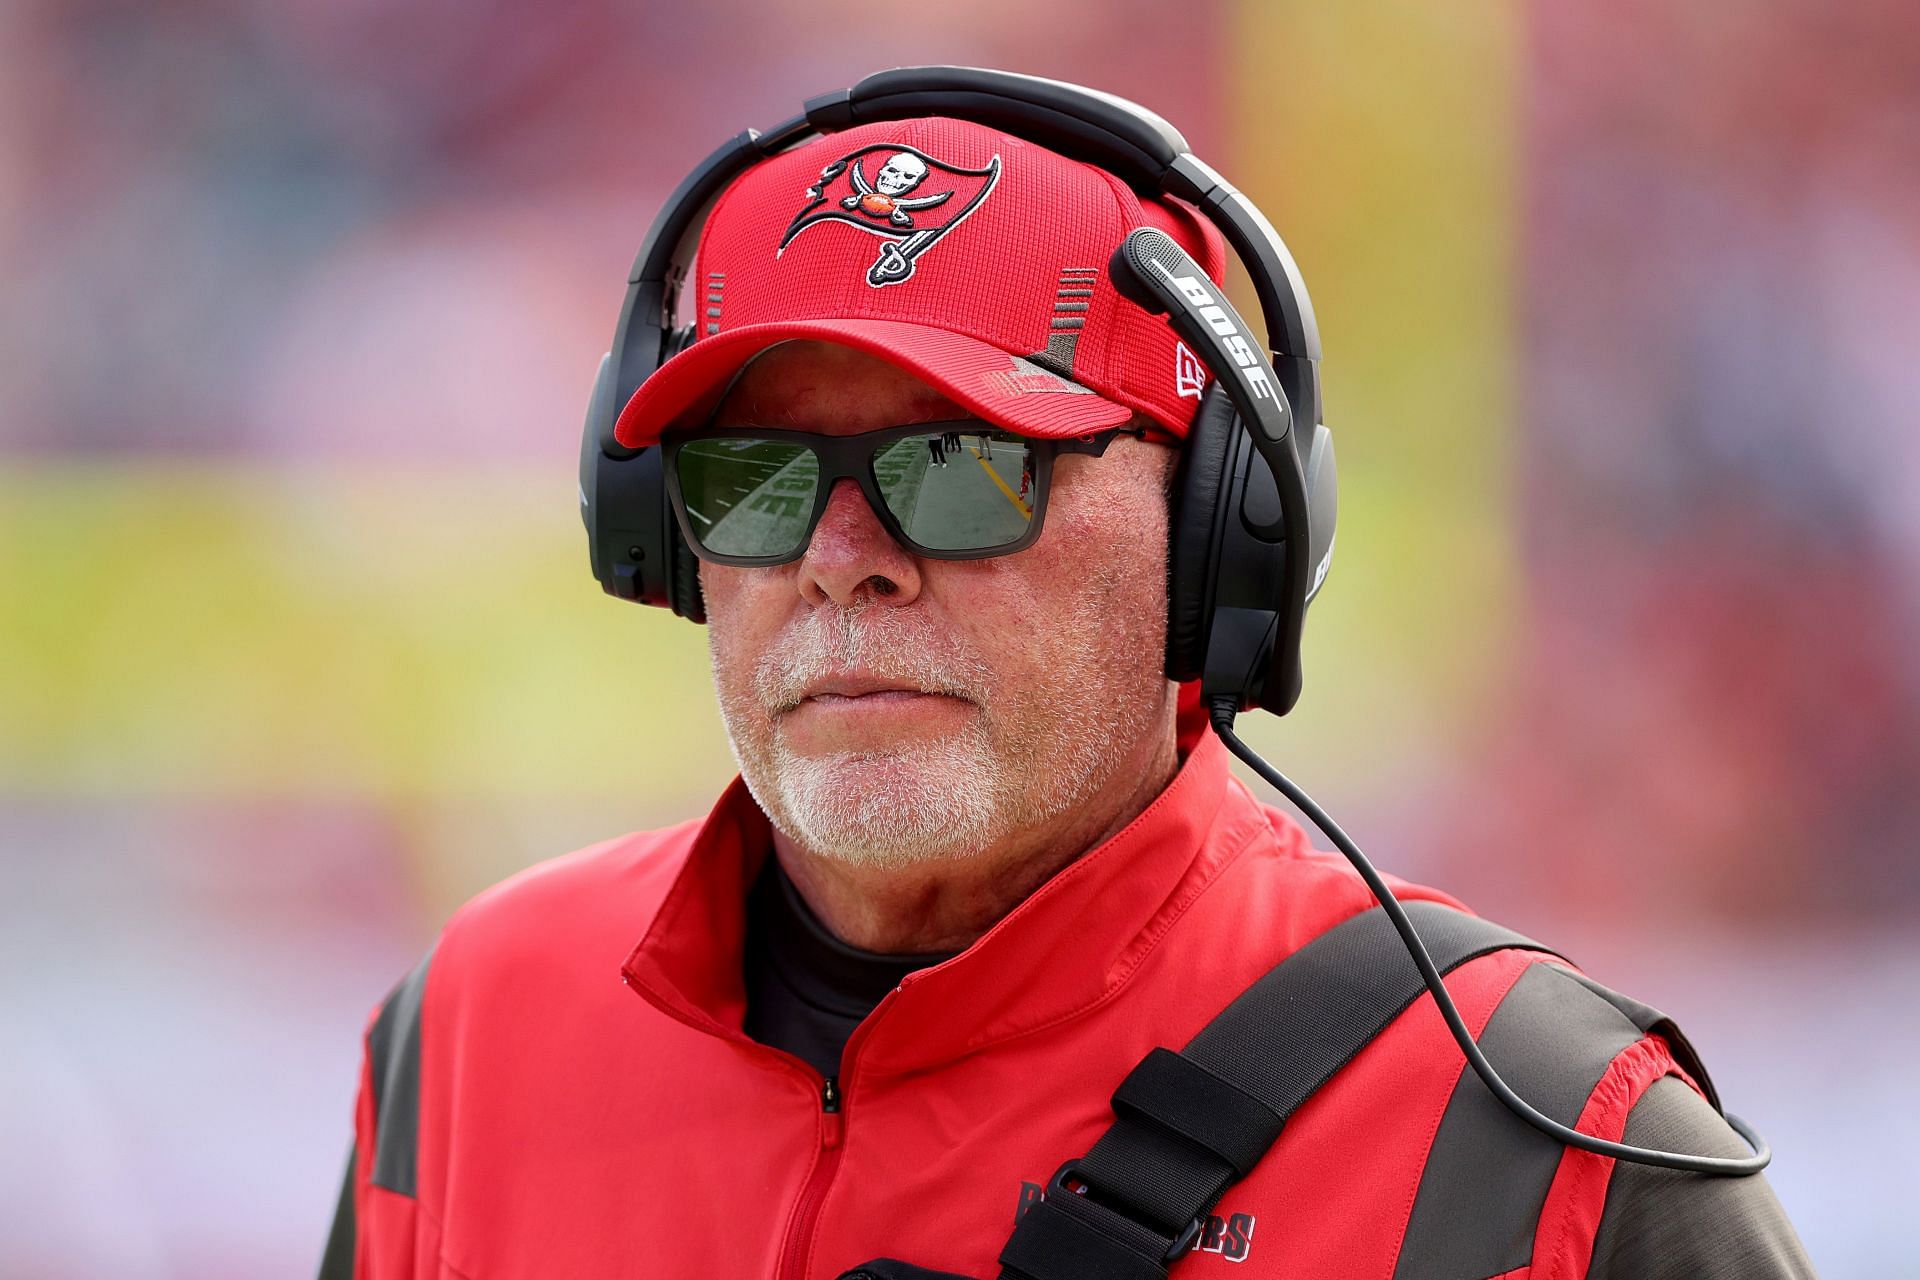 Arians has a plan if Brady does retire